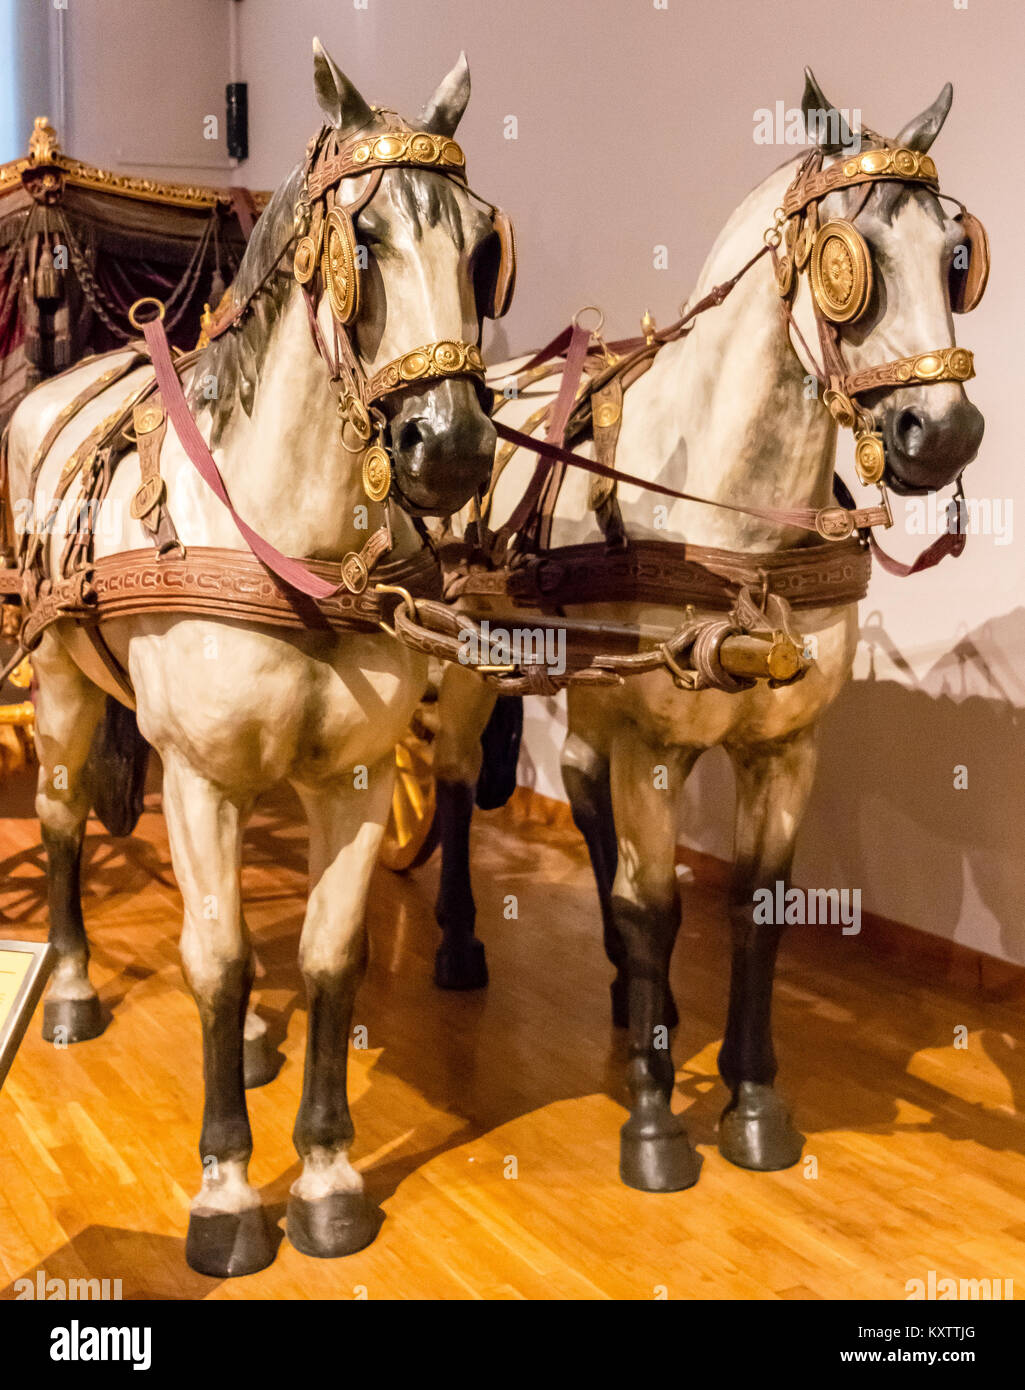 Exhibition of ornately decorated Lipizzan horses used by the Habsburg monarchs, Imperial Carriage Museum, Schönbrunn Palace, Vienna, Austria, Europe Stock Photo